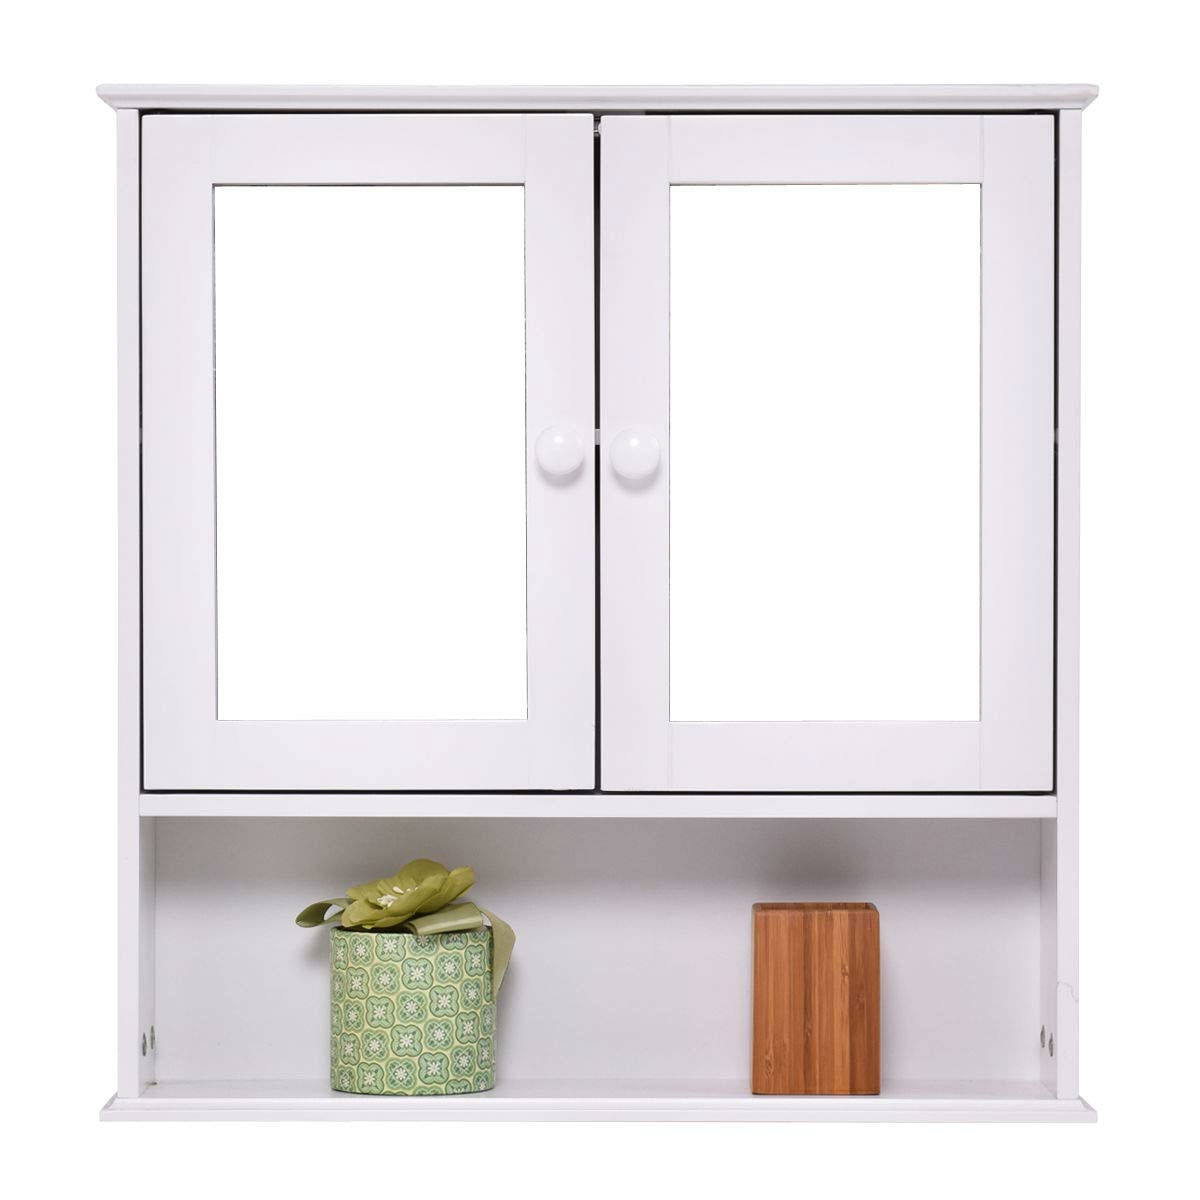 Simple Bathroom Mirror Wall Cabinet in White Wood Finish